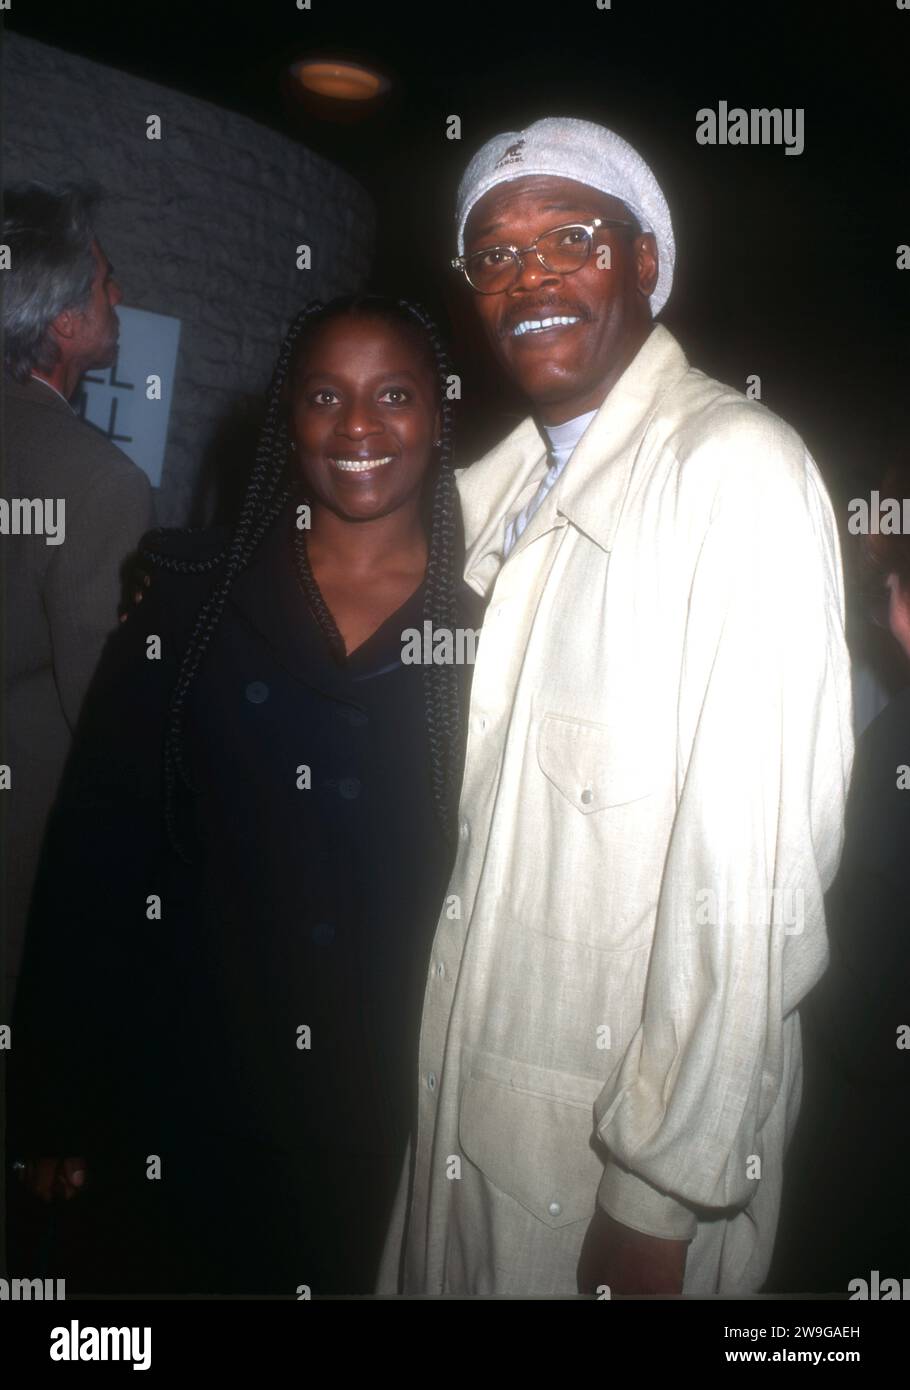 Los Angeles, California, USA 7th October 1996 Actor Samuel L. Jackson and wife LaTanya Richardson Jackson attend New Line CinemaÕs ÔThe Long Kiss GoodnightÕ Premiere at Mann National Theatre on October 7, 1996 in Los Angeles, California, USA. Photo by Barry King/Alamy Stock Photo Stock Photo